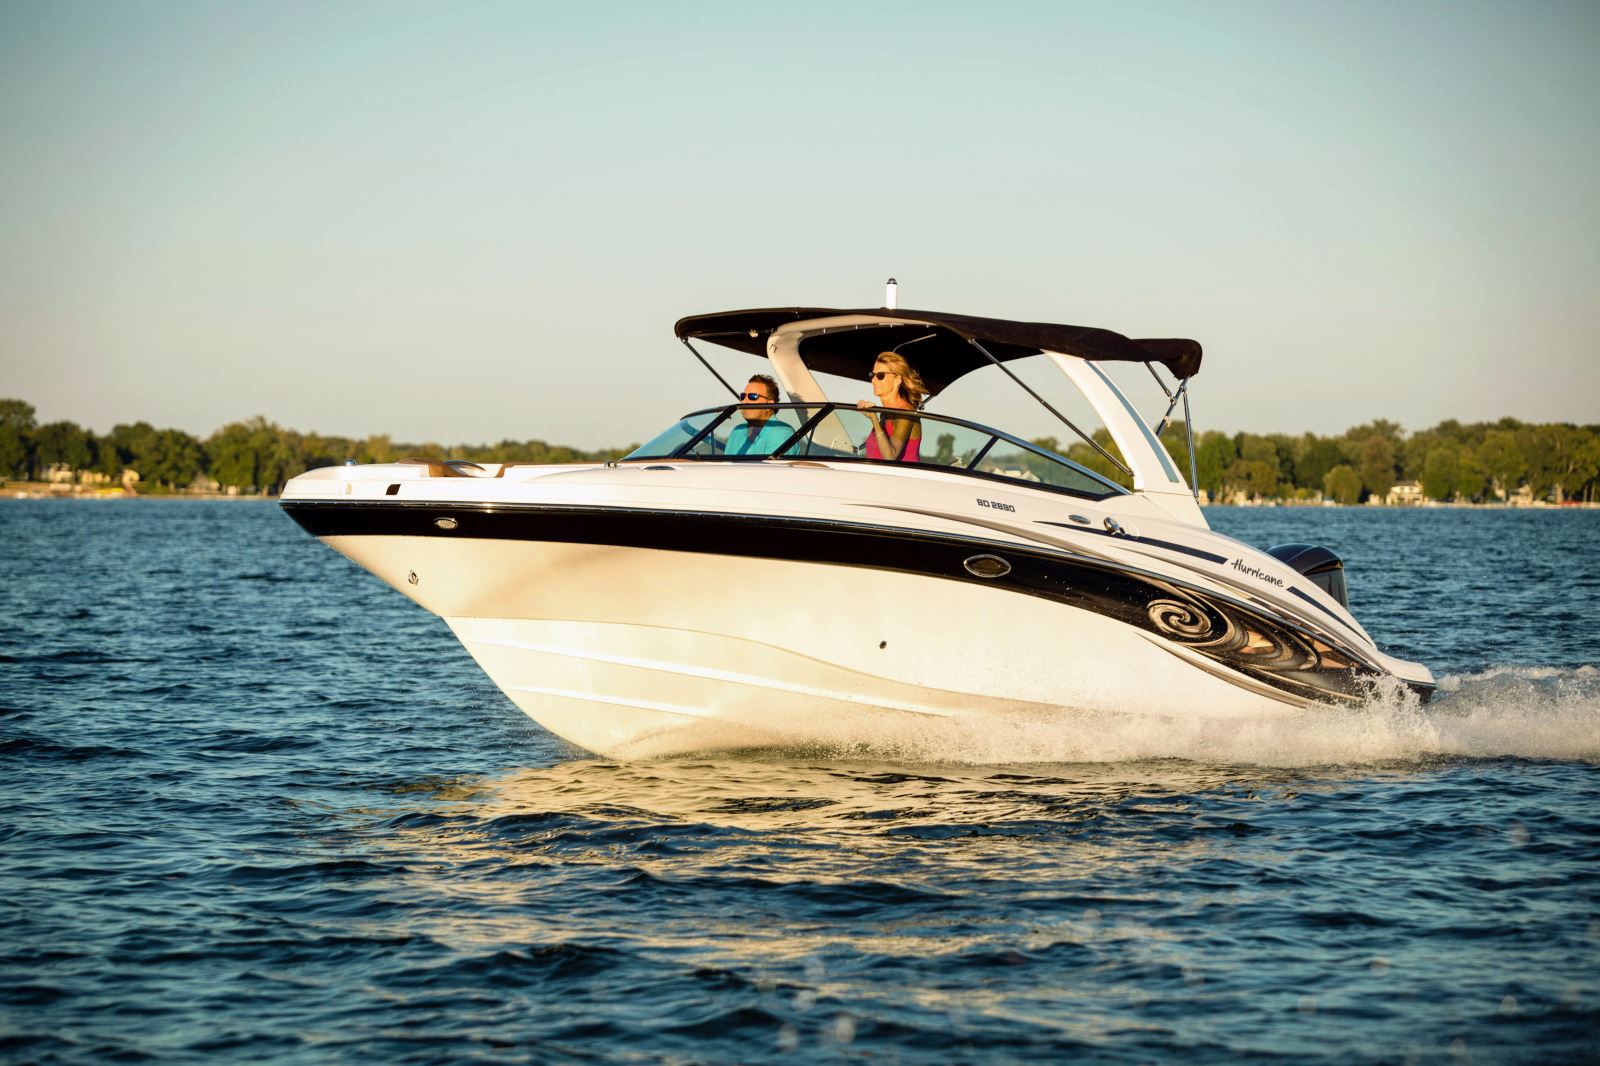 Power Of A Hurricane SunDeck pairs up with the new 425hp beast